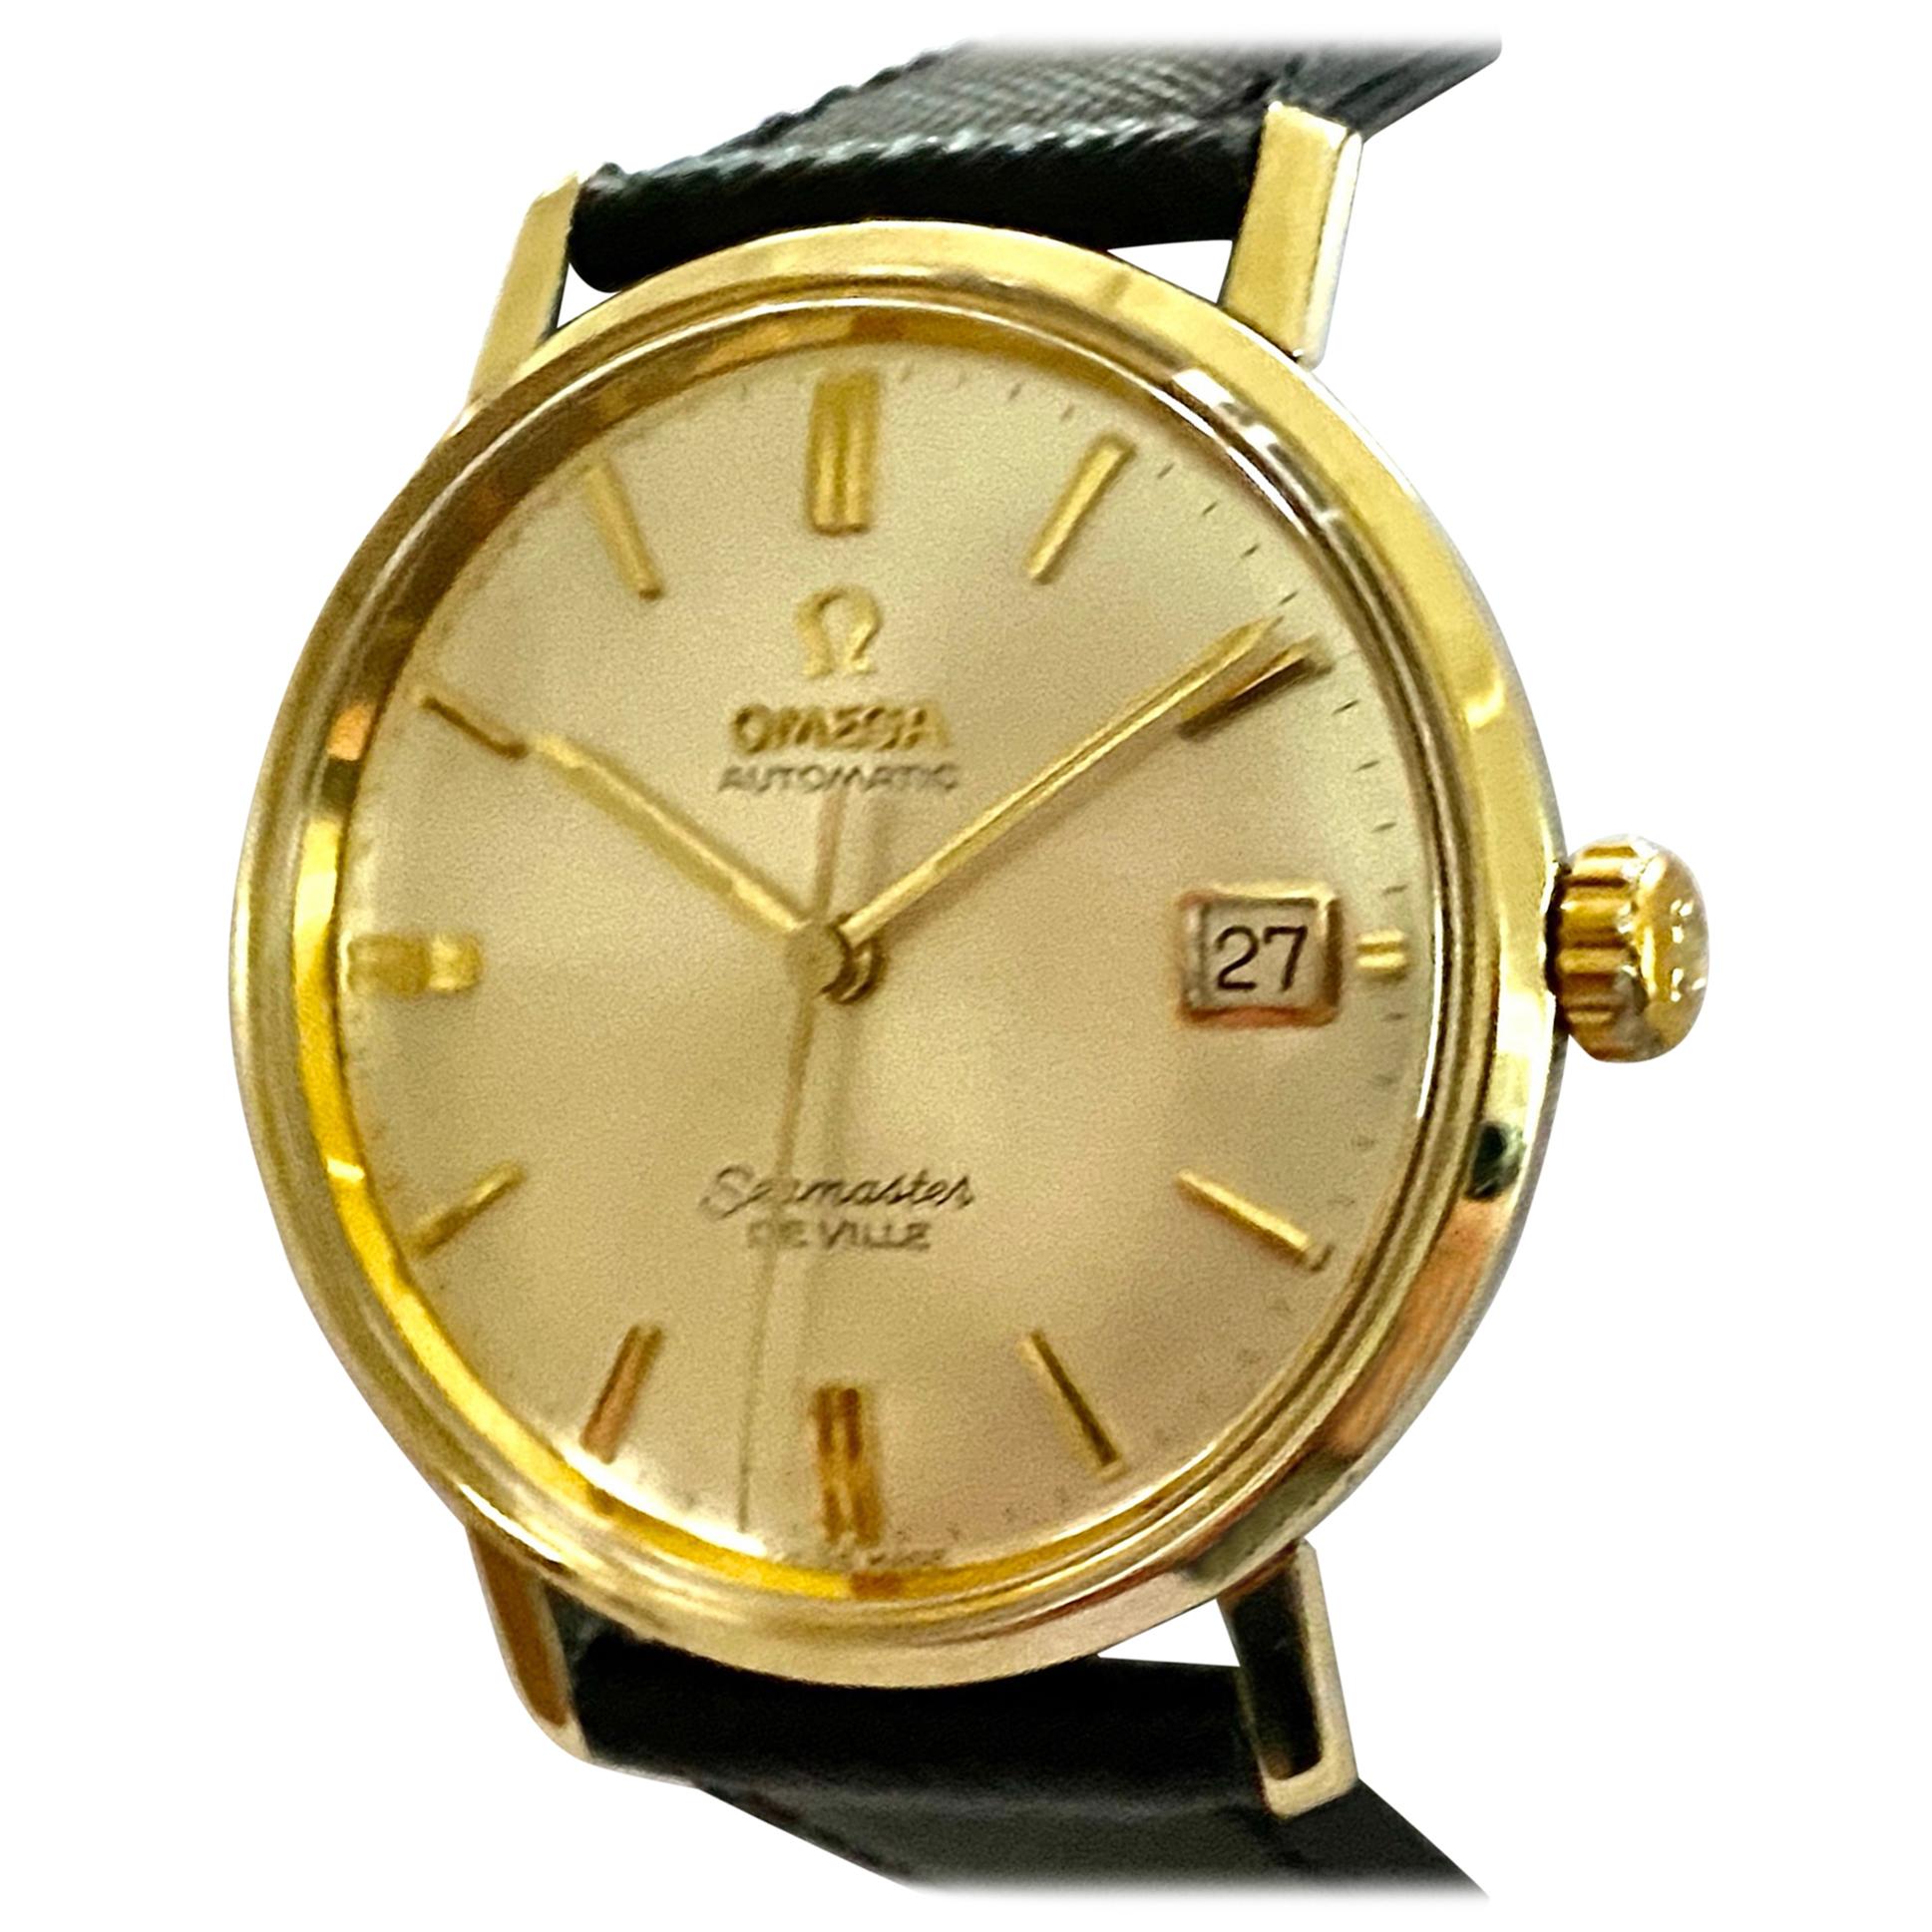 Omega Seamaster de Ville Steel/Gold-Plated Automatic Watch 1964, CD 166.020